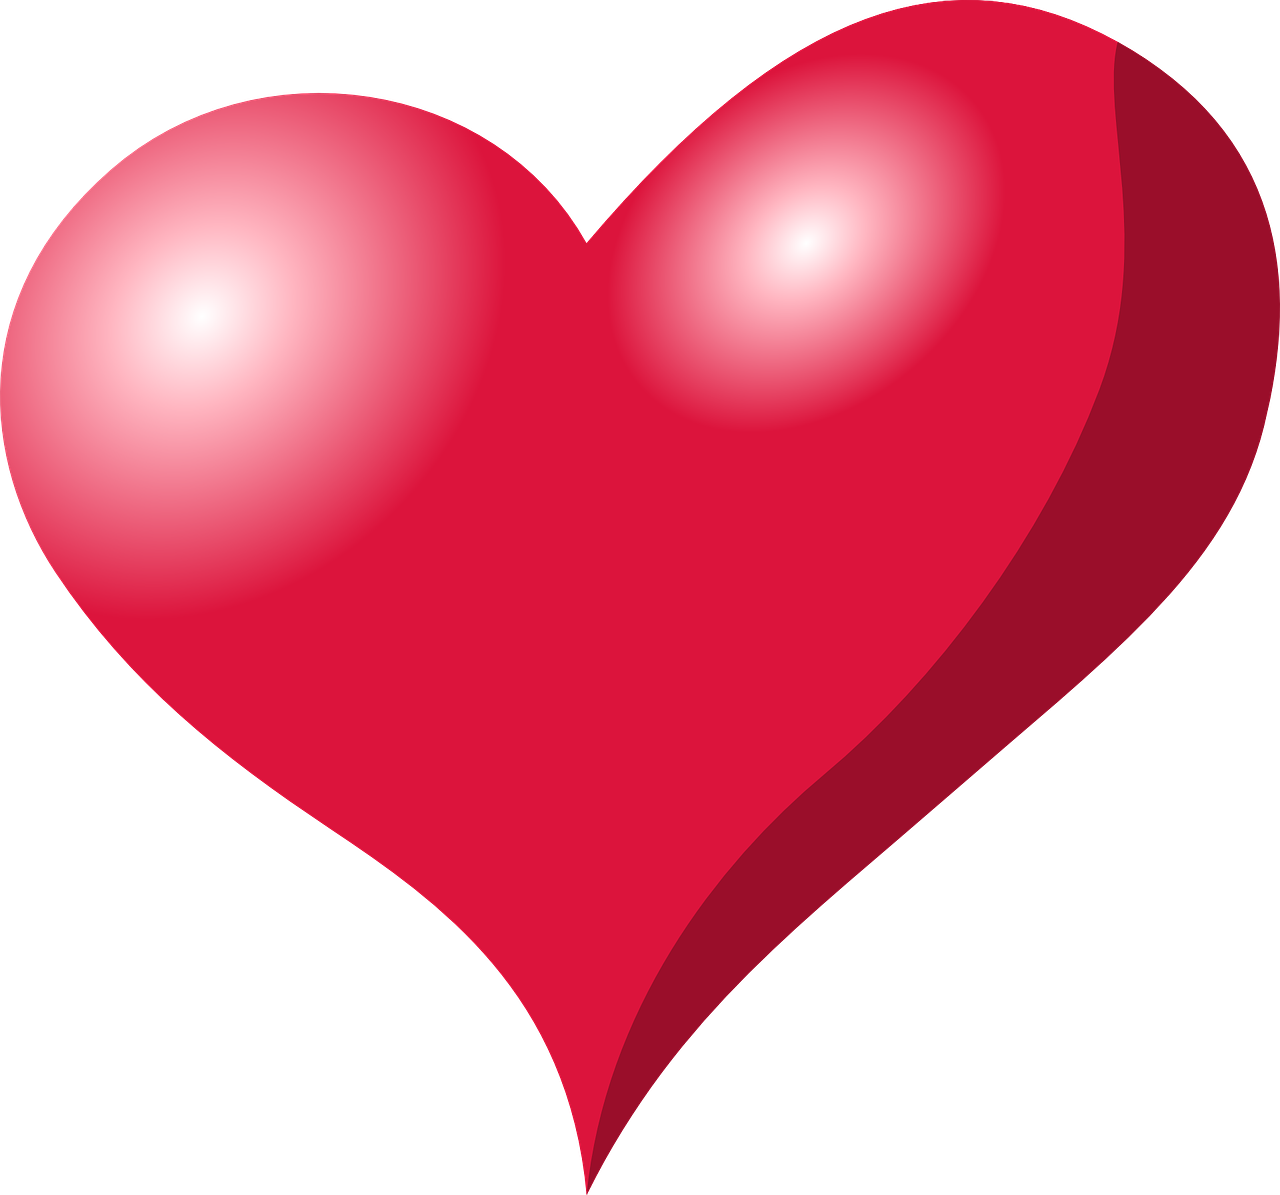 Heart Red Love Shapes Symbols PNG.